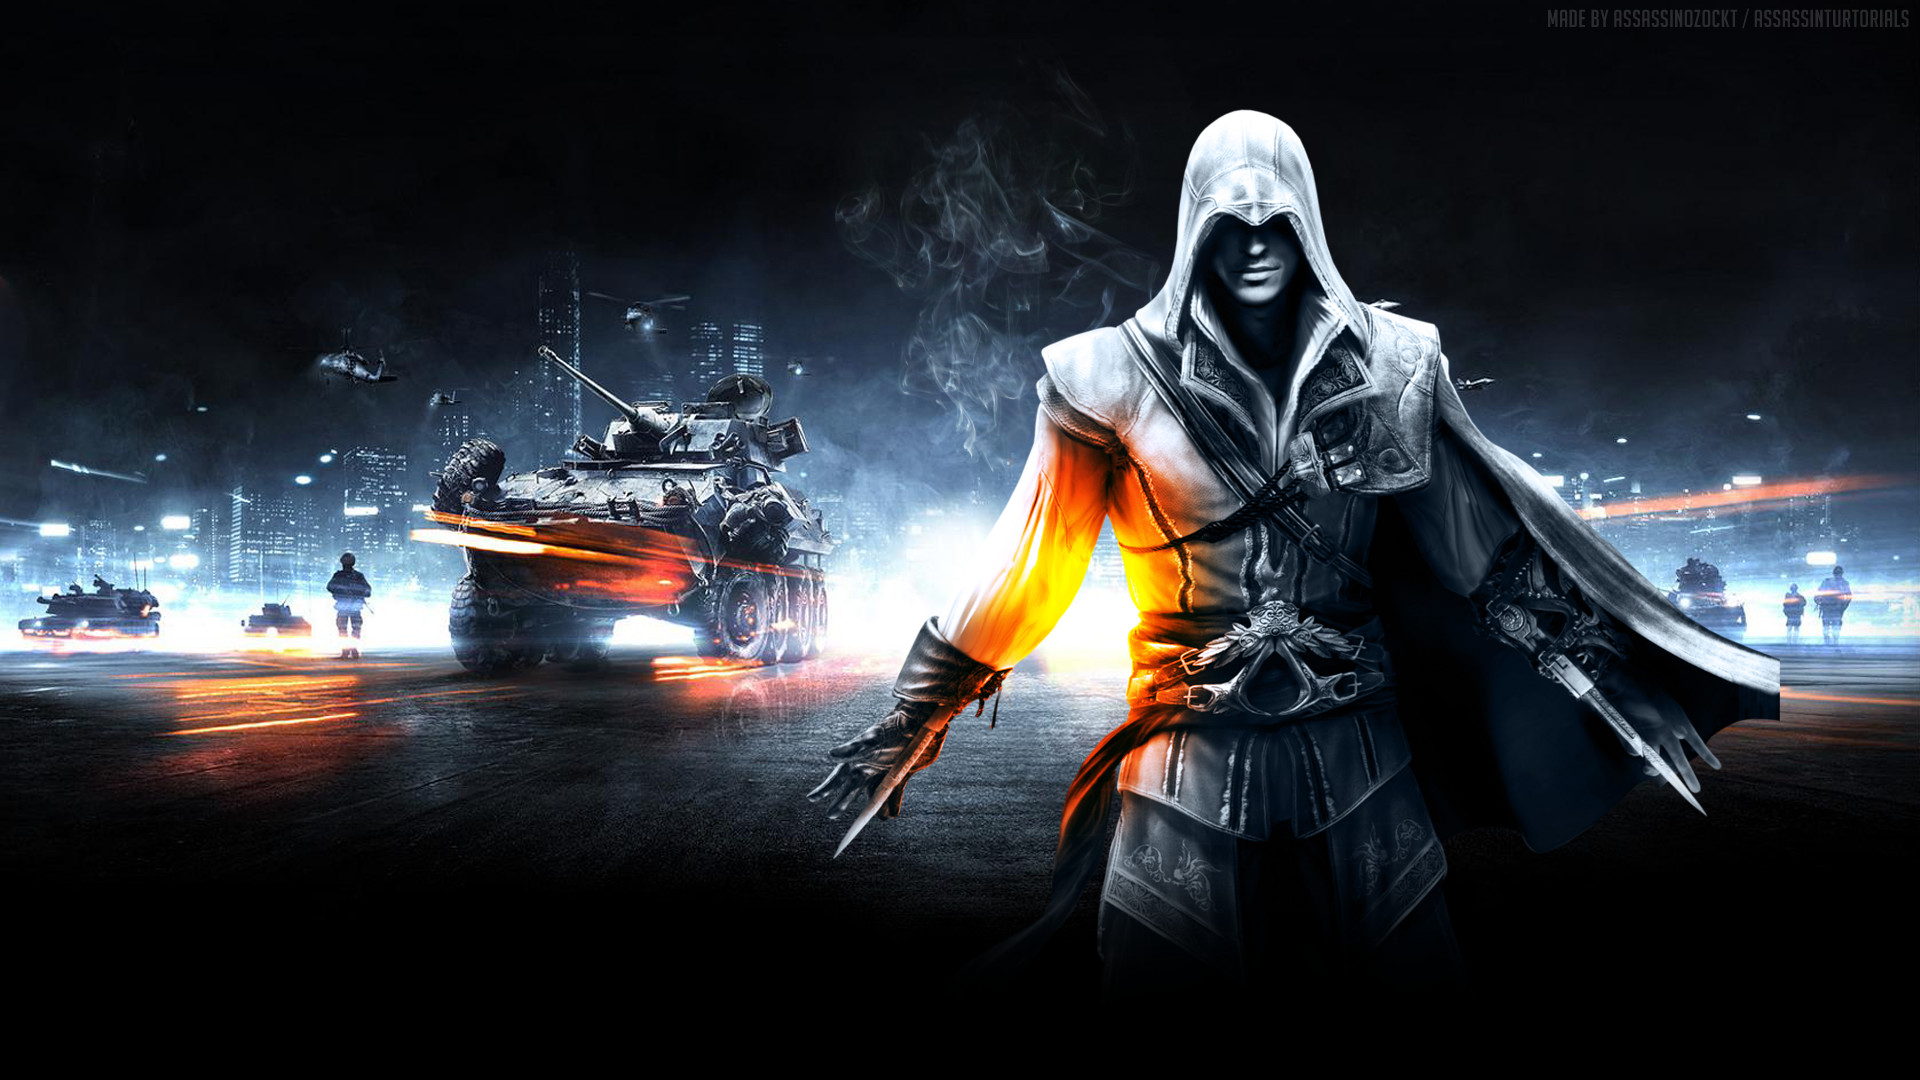 1920x1080 Video Game Backgrounds | Latest Hd Wallpapers